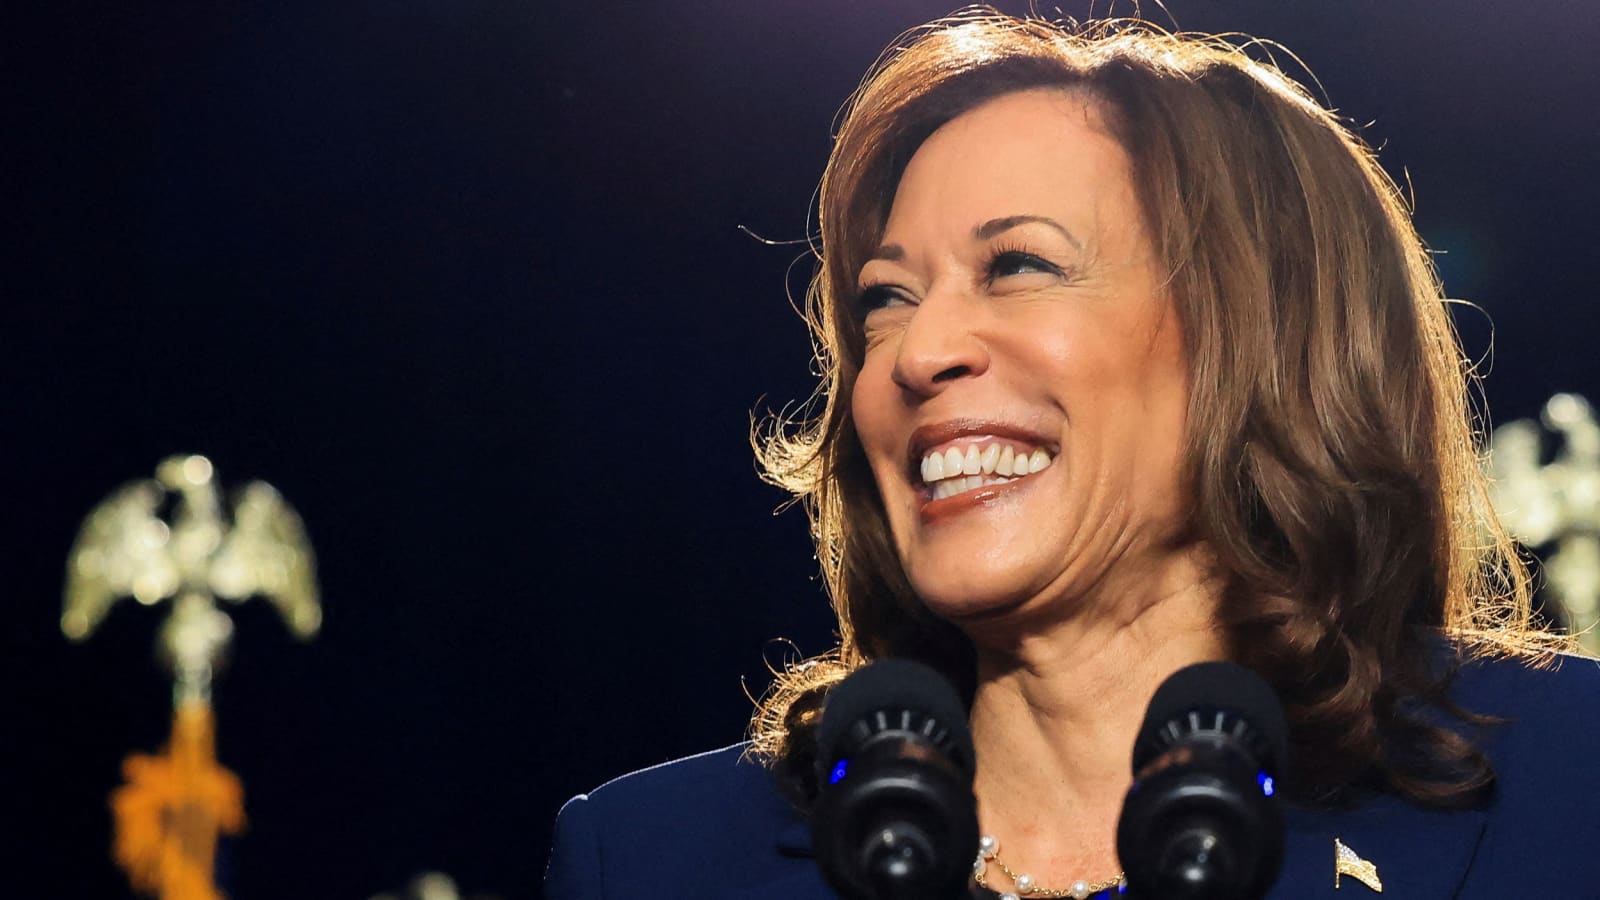 A Win By “Incompetent” Harris Will Lead To WWIII Says Trump